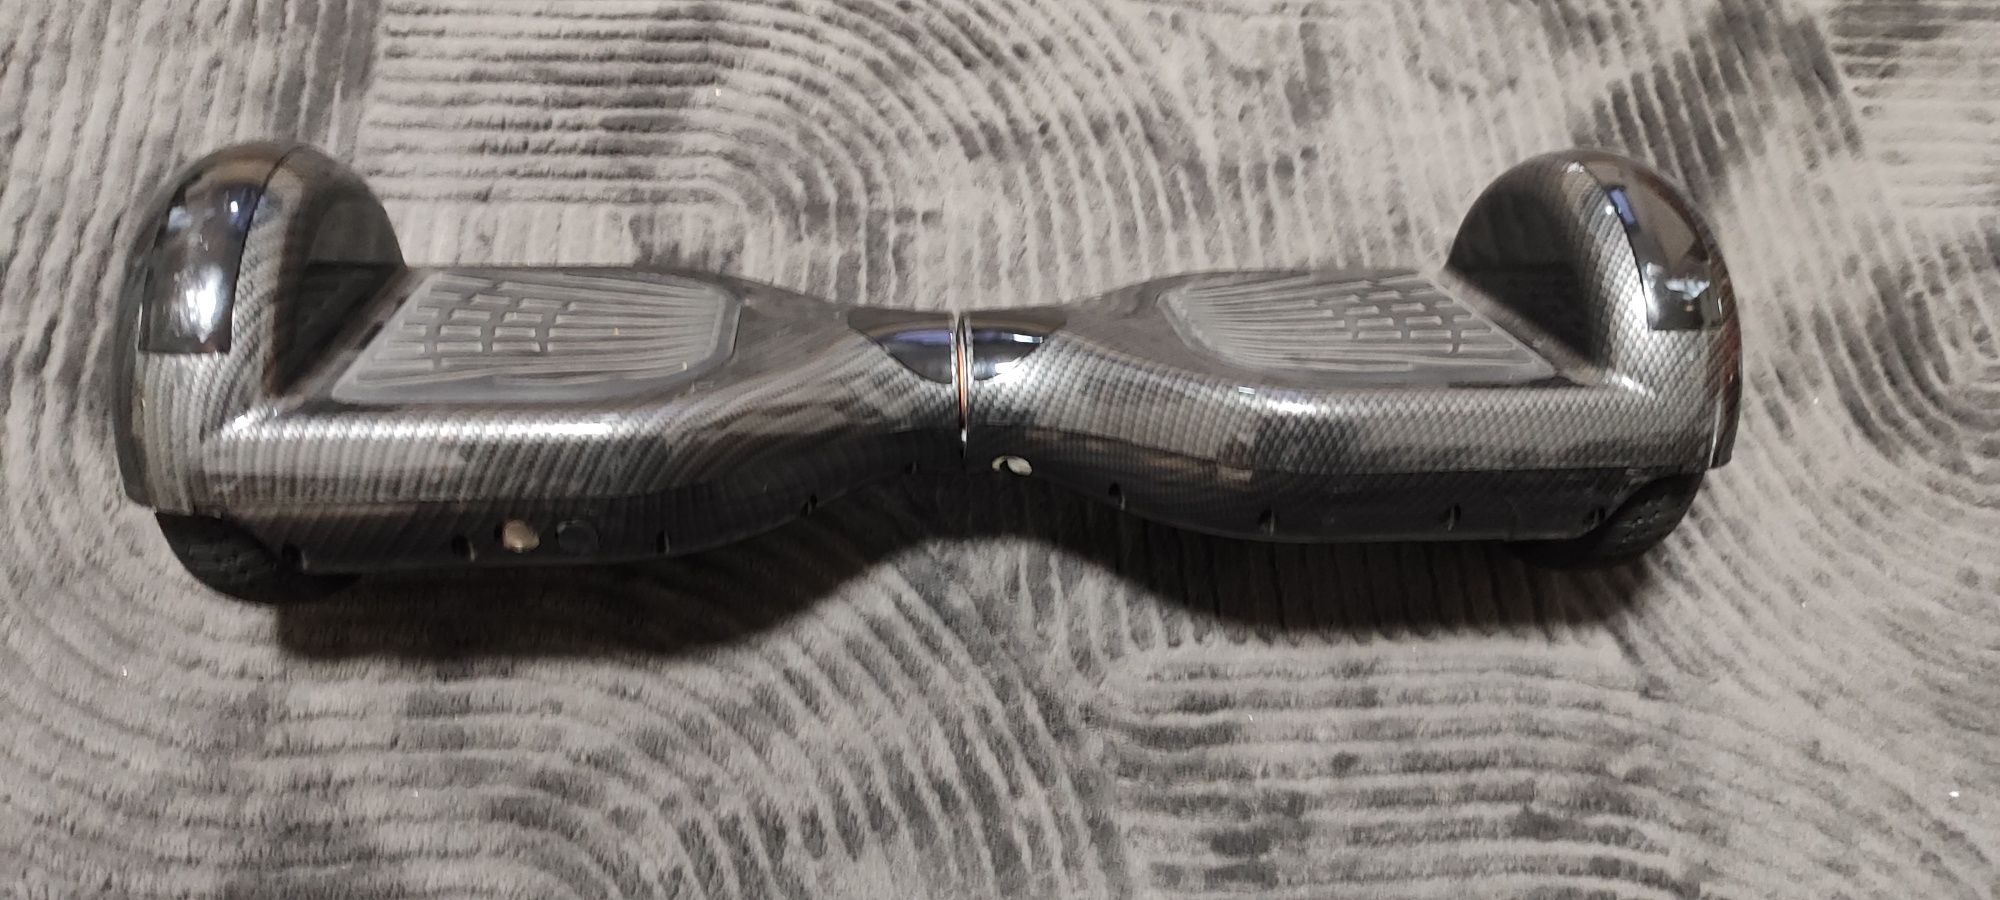 Hoverboard                   .